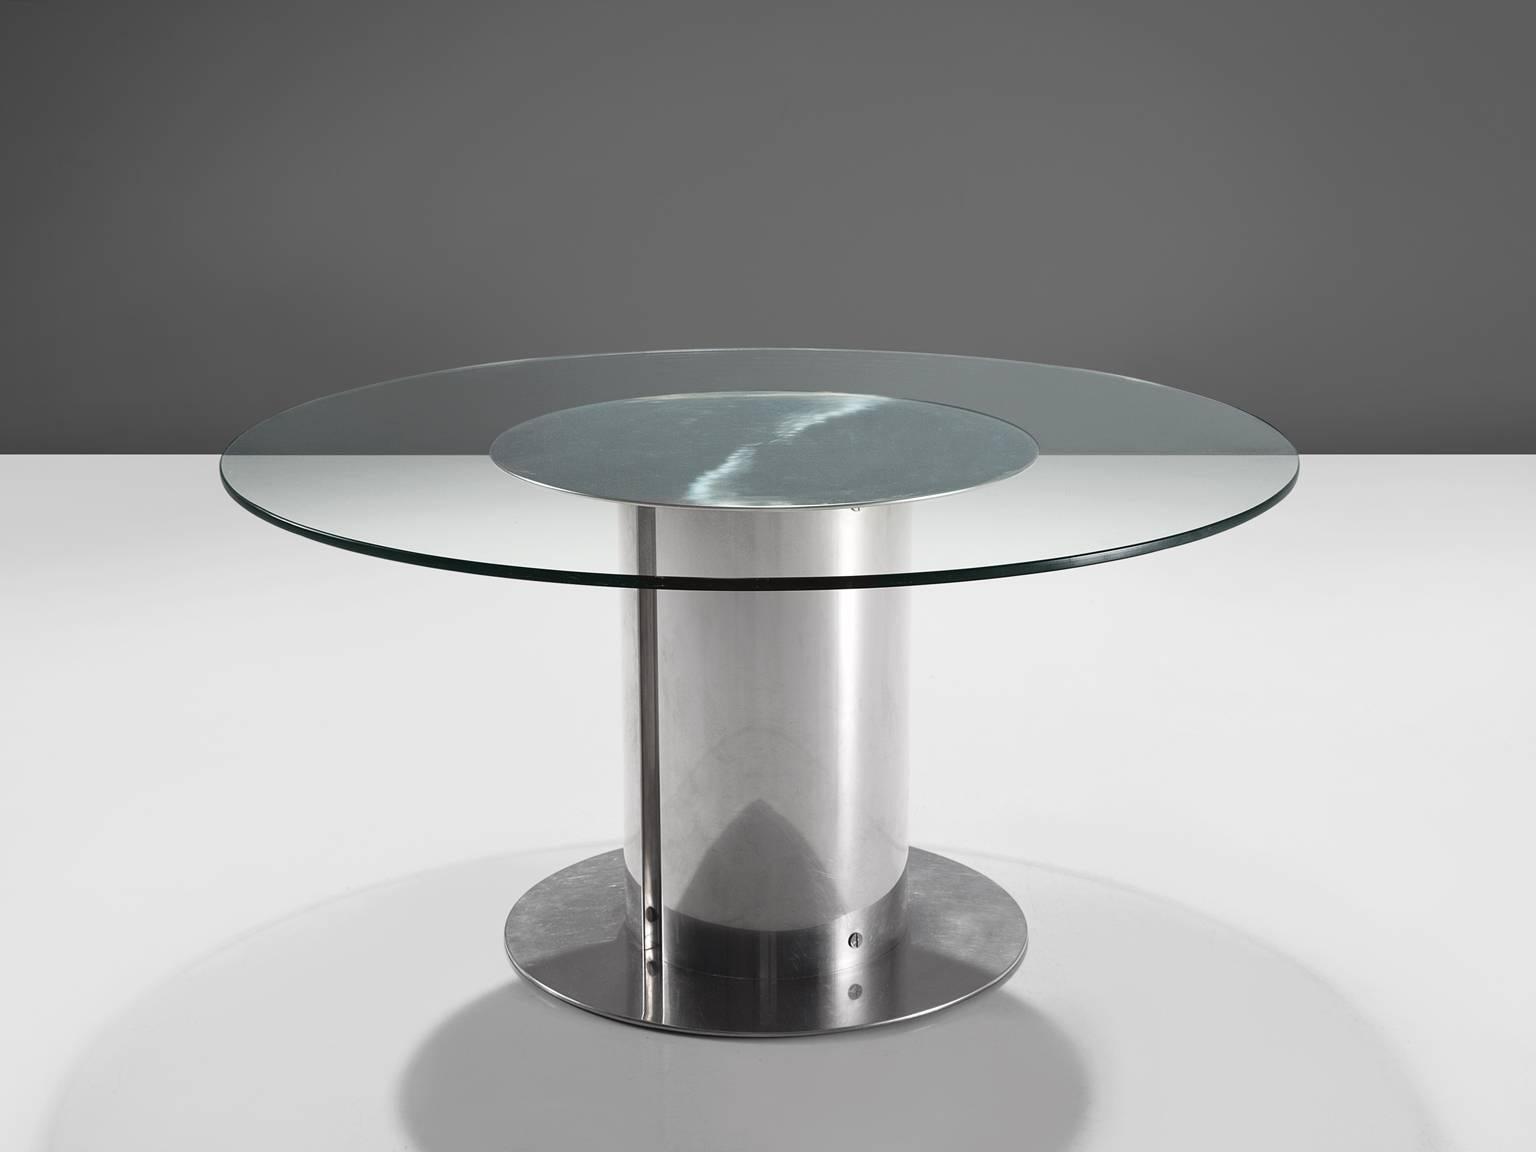 Antonia Astori for Cidue, Cidonio dining table, chromed metal, glass, Italy, ca. 1950. 

This postmodern centre table with chromed industrial foot features a circular glass top and a brushed chromed metal base. The table is designed for Cidue and